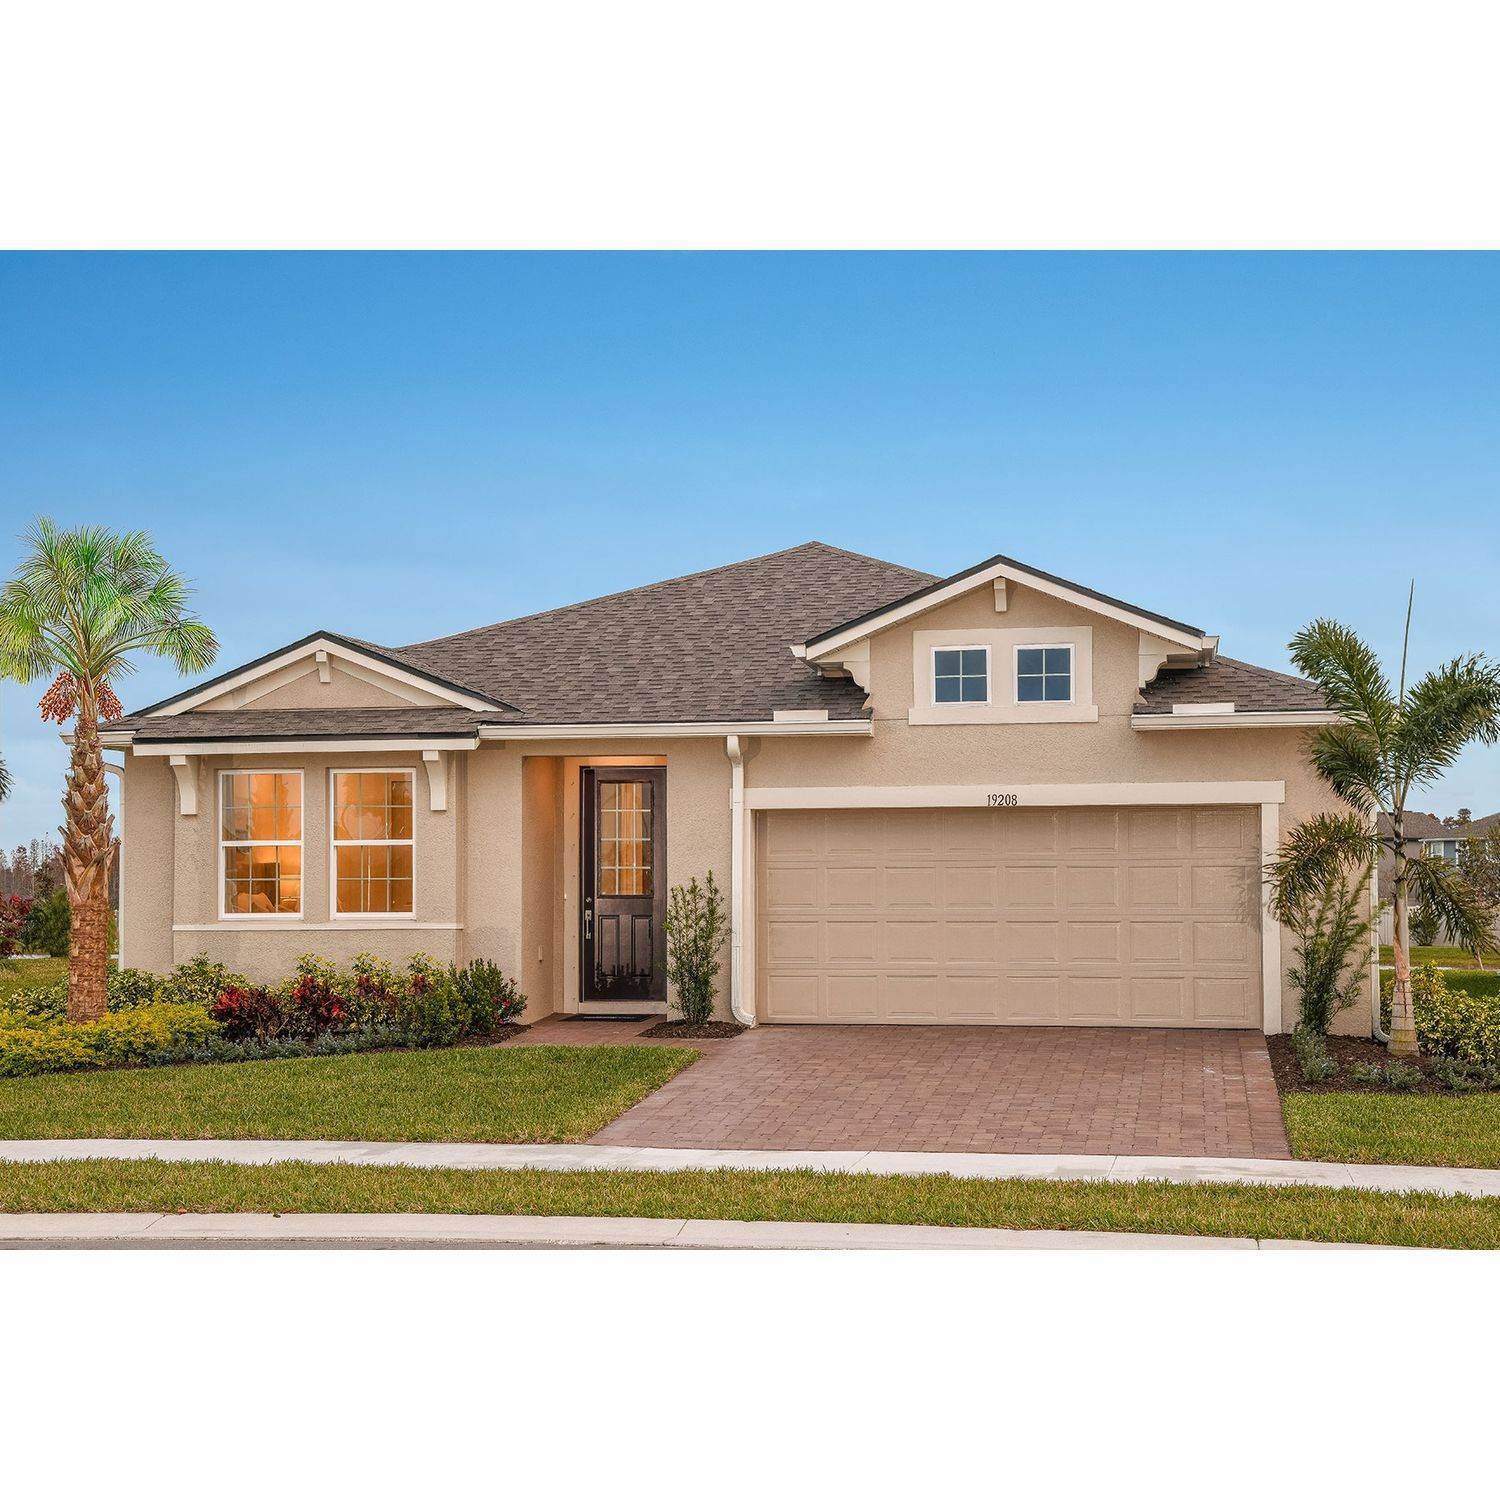 Single Family for Sale at Lutz, FL 33558